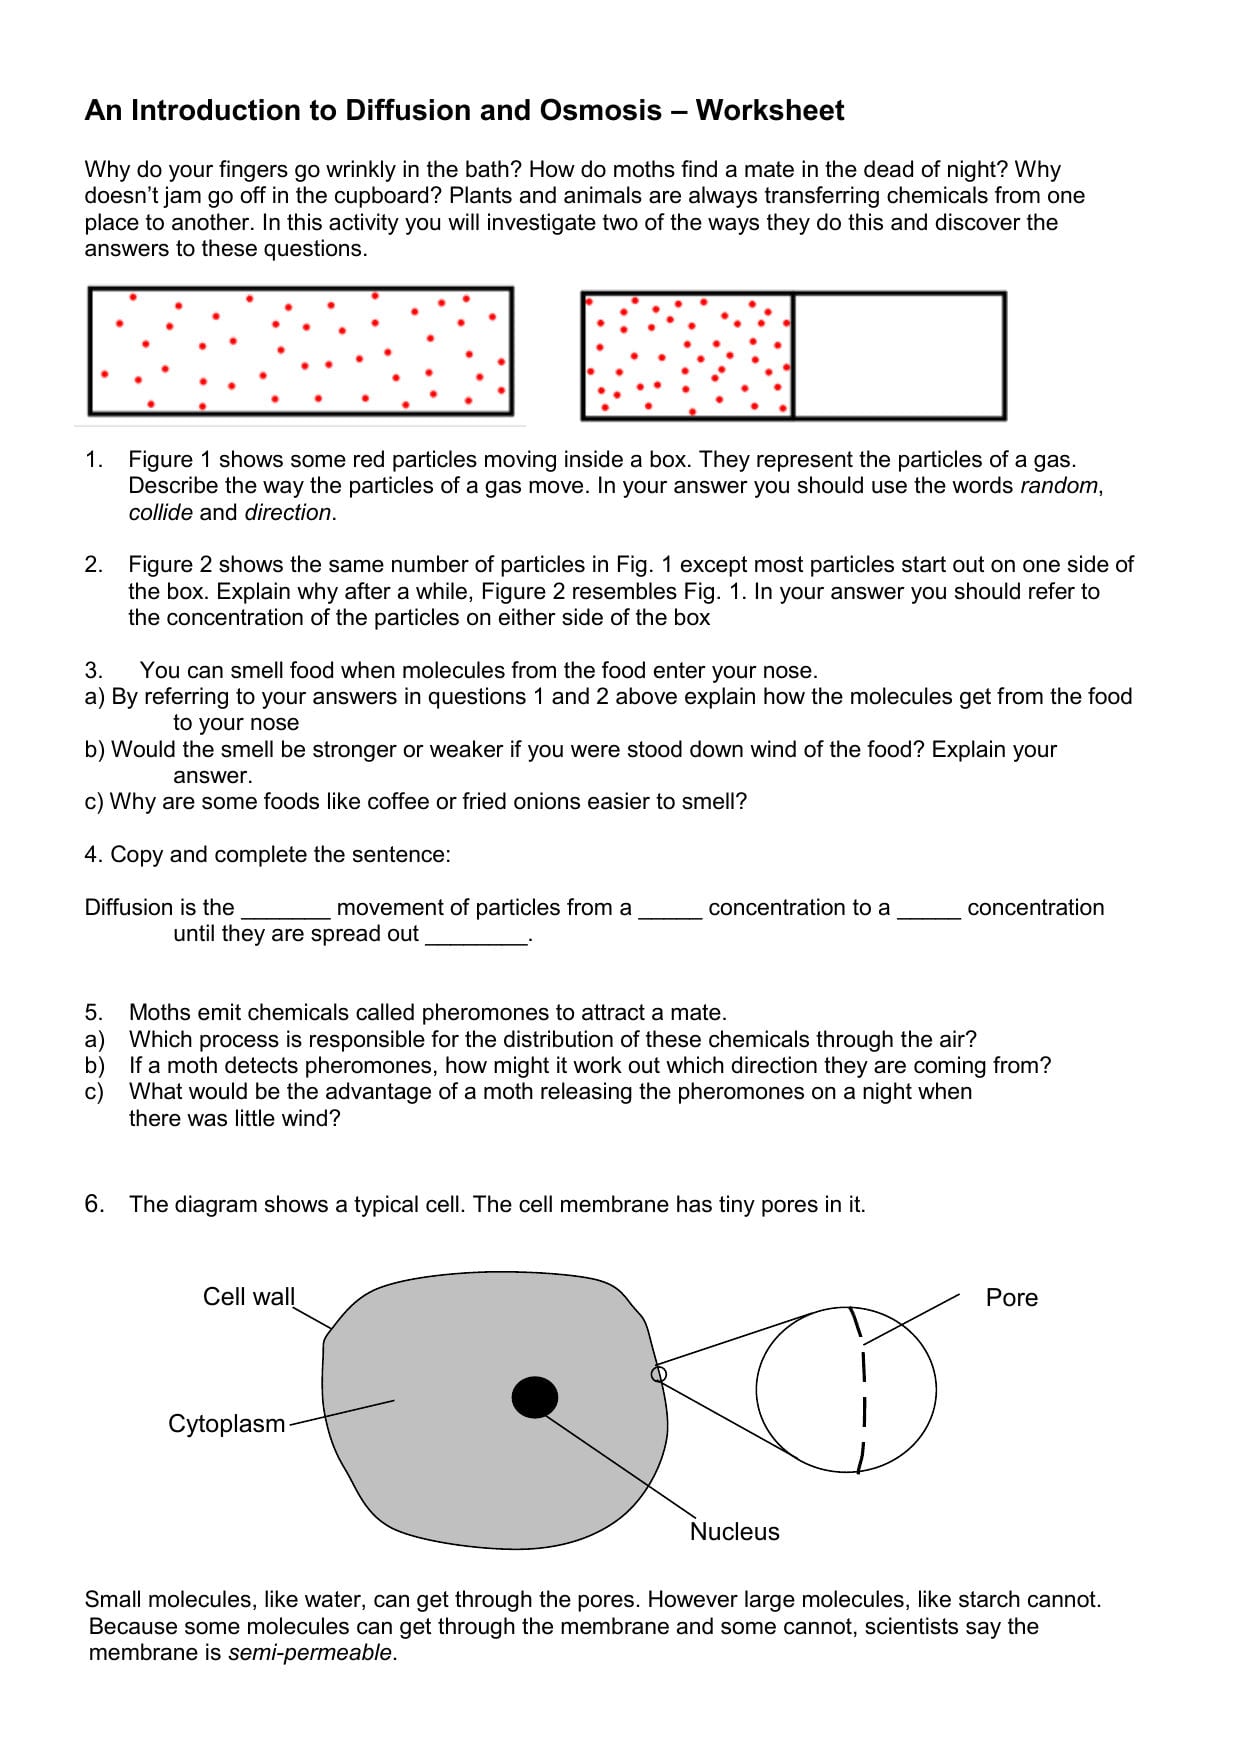 An Introduction To Diffusion And Osmosis Throughout Diffusion And Osmosis Worksheet Answer Key